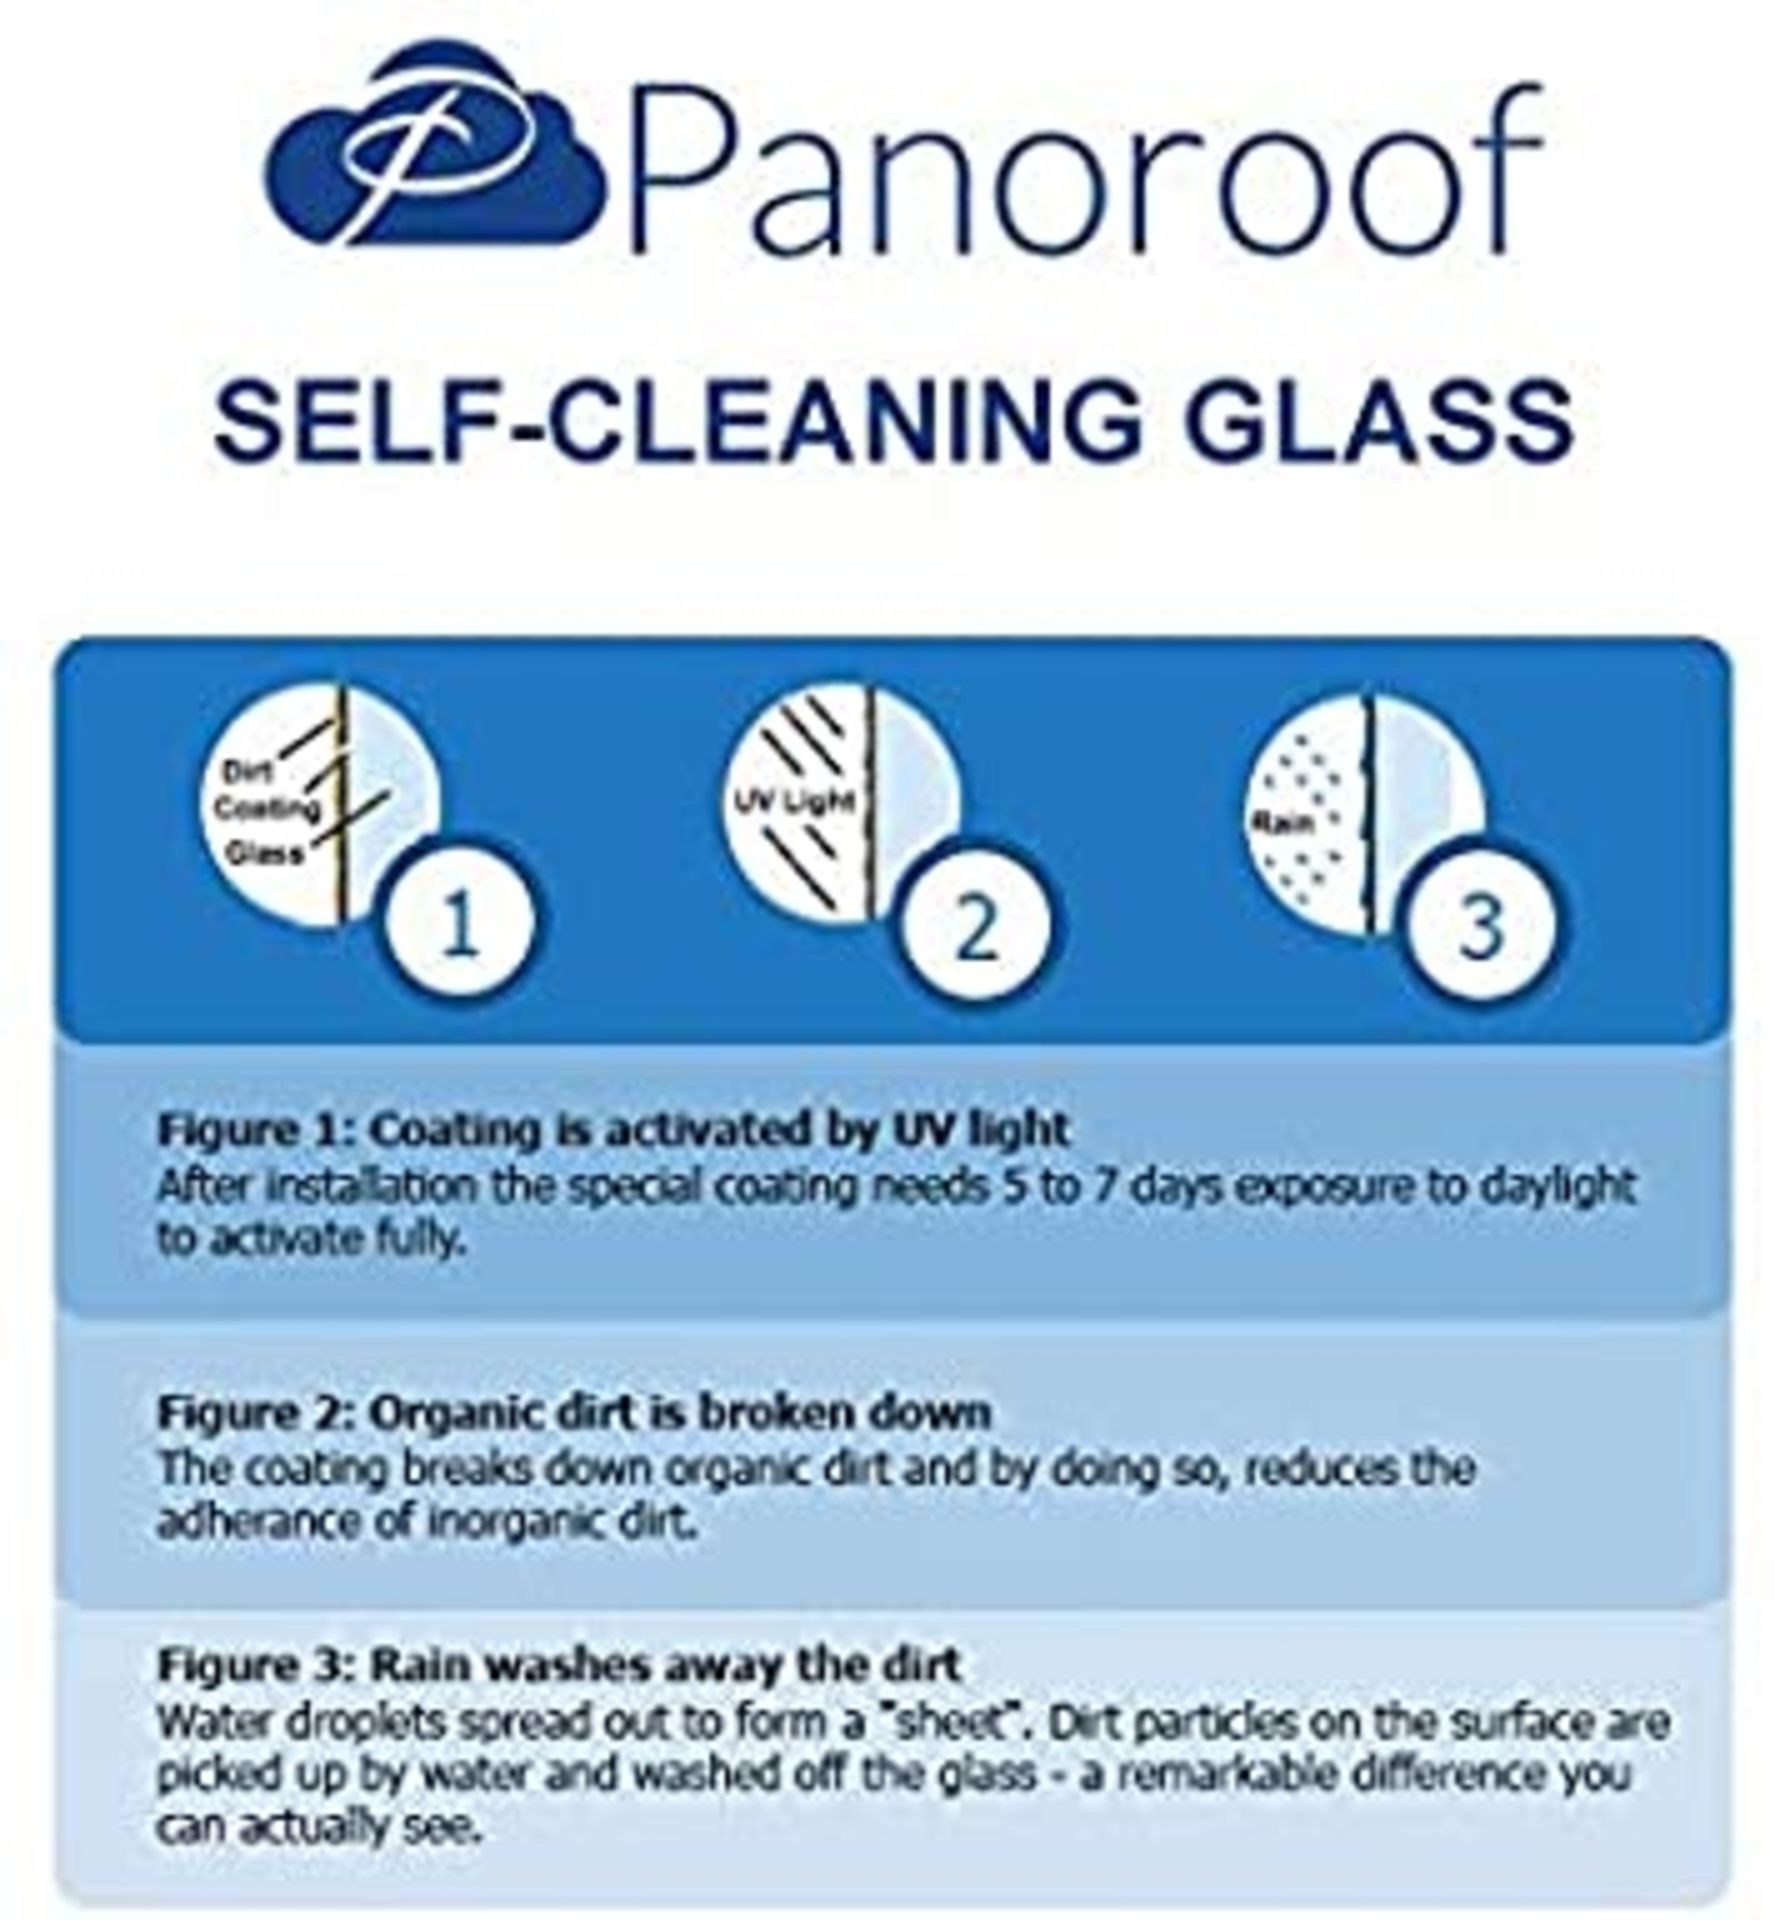 """Panoroof Triple Glazed Self Cleaning 800x2500mm (inside Size Visable glass area) Seamless Glass - Image 6 of 6